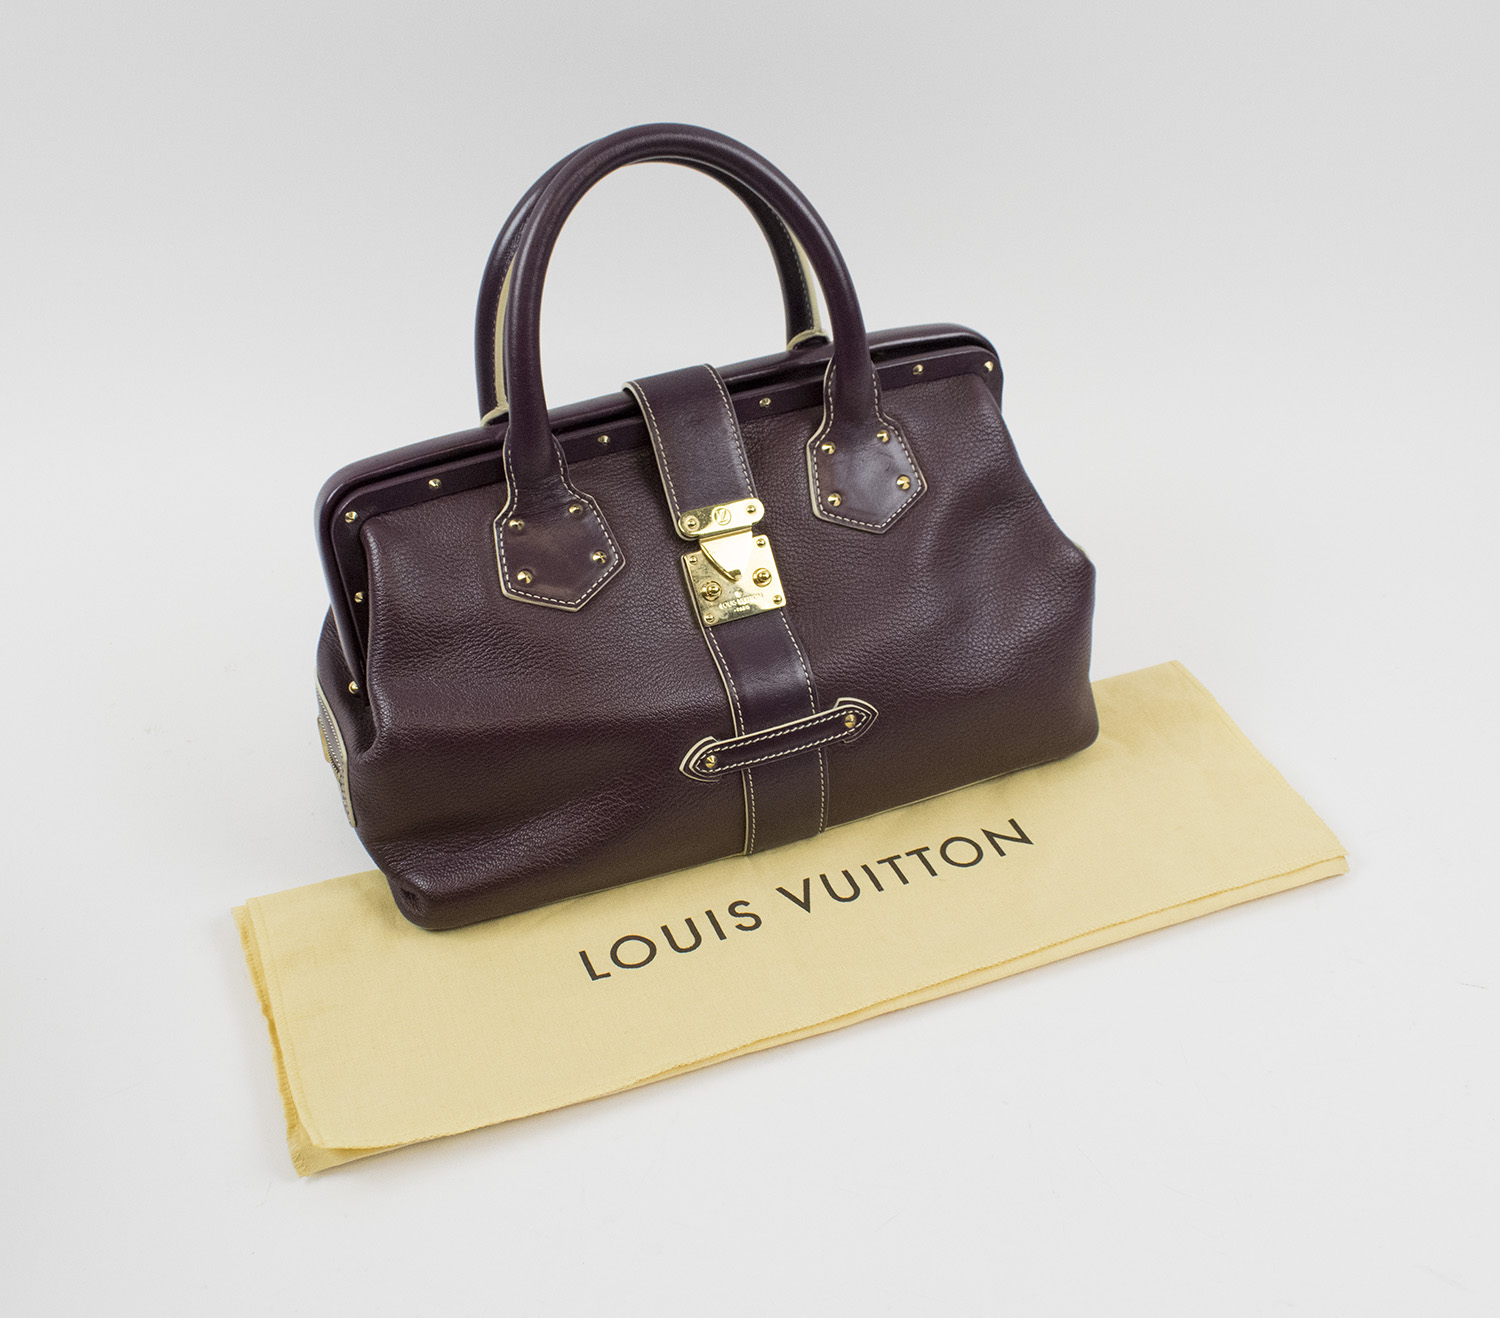 LOUIS VUITTON L'INGENIEUX BAG IN PRUNE SUHALI LEATHER, two top handles,  gold tone hardware with square bottom feet, flap tab with S-lock closure,  prune fabric lining with micro monogram, two small zip